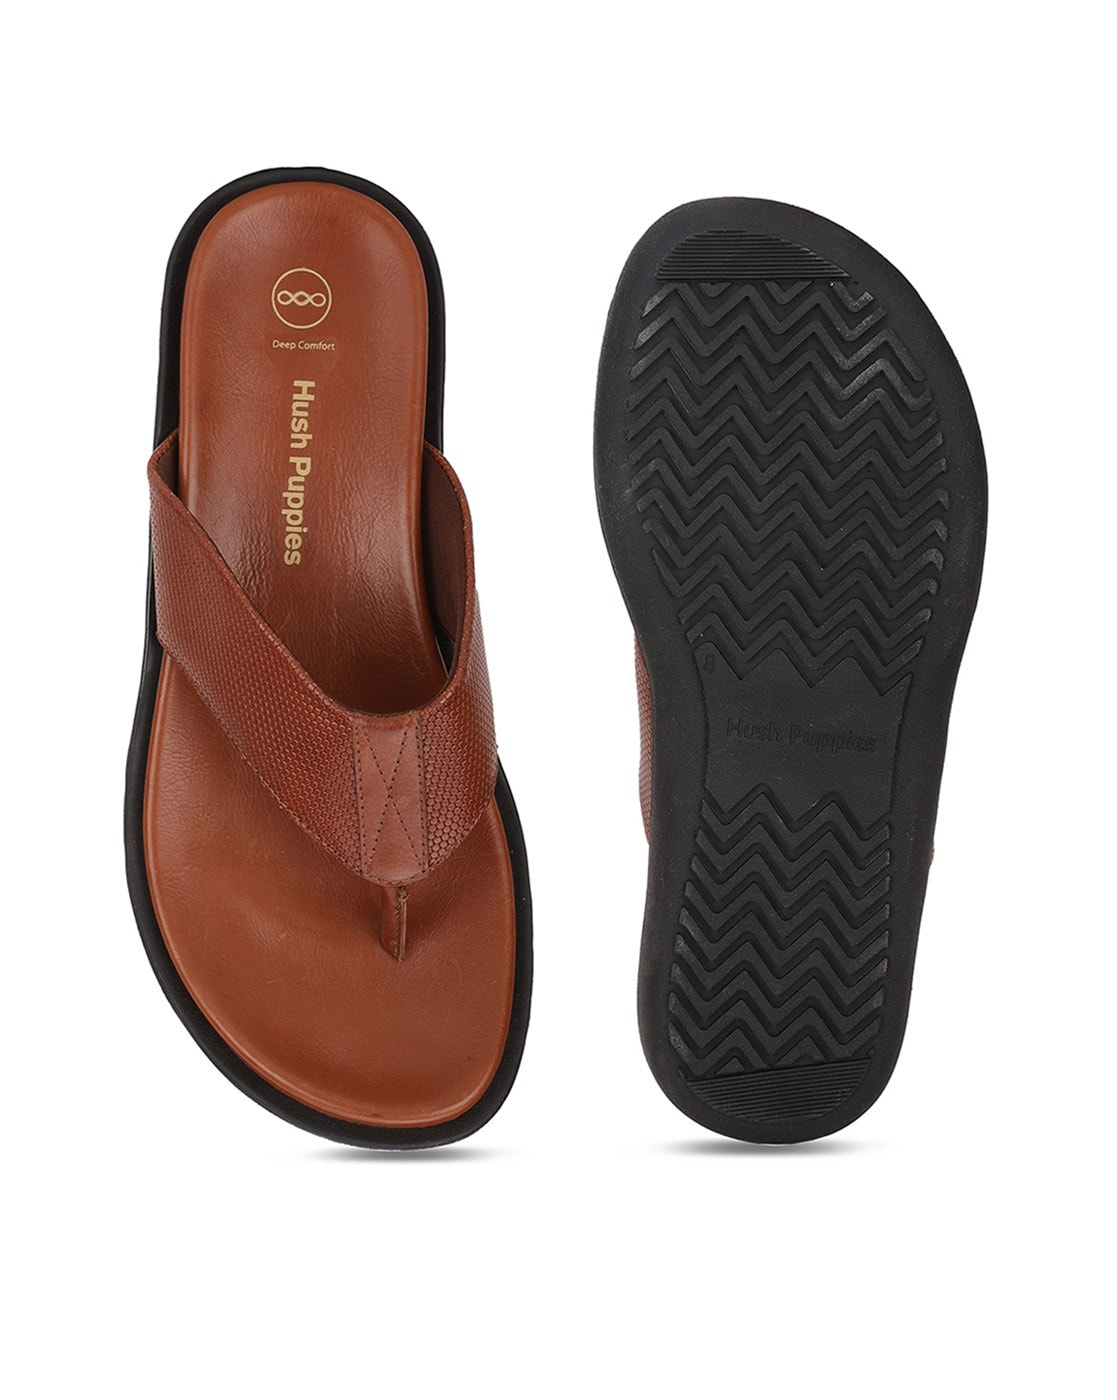 Hush Puppies CONNOR Mens Leather Toe Post Sandals Brown | Shuperb-sgquangbinhtourist.com.vn